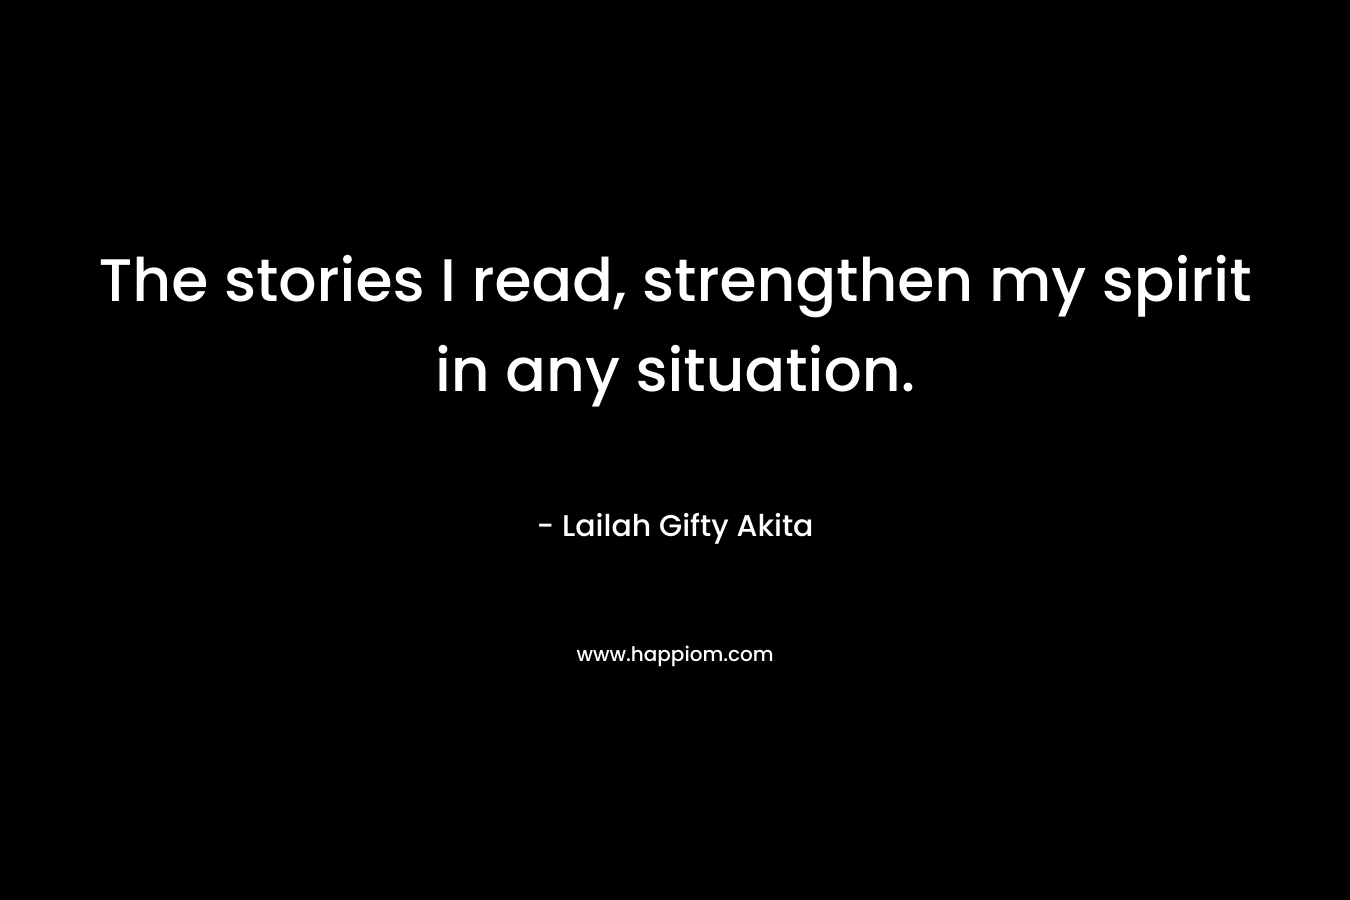 The stories I read, strengthen my spirit in any situation.